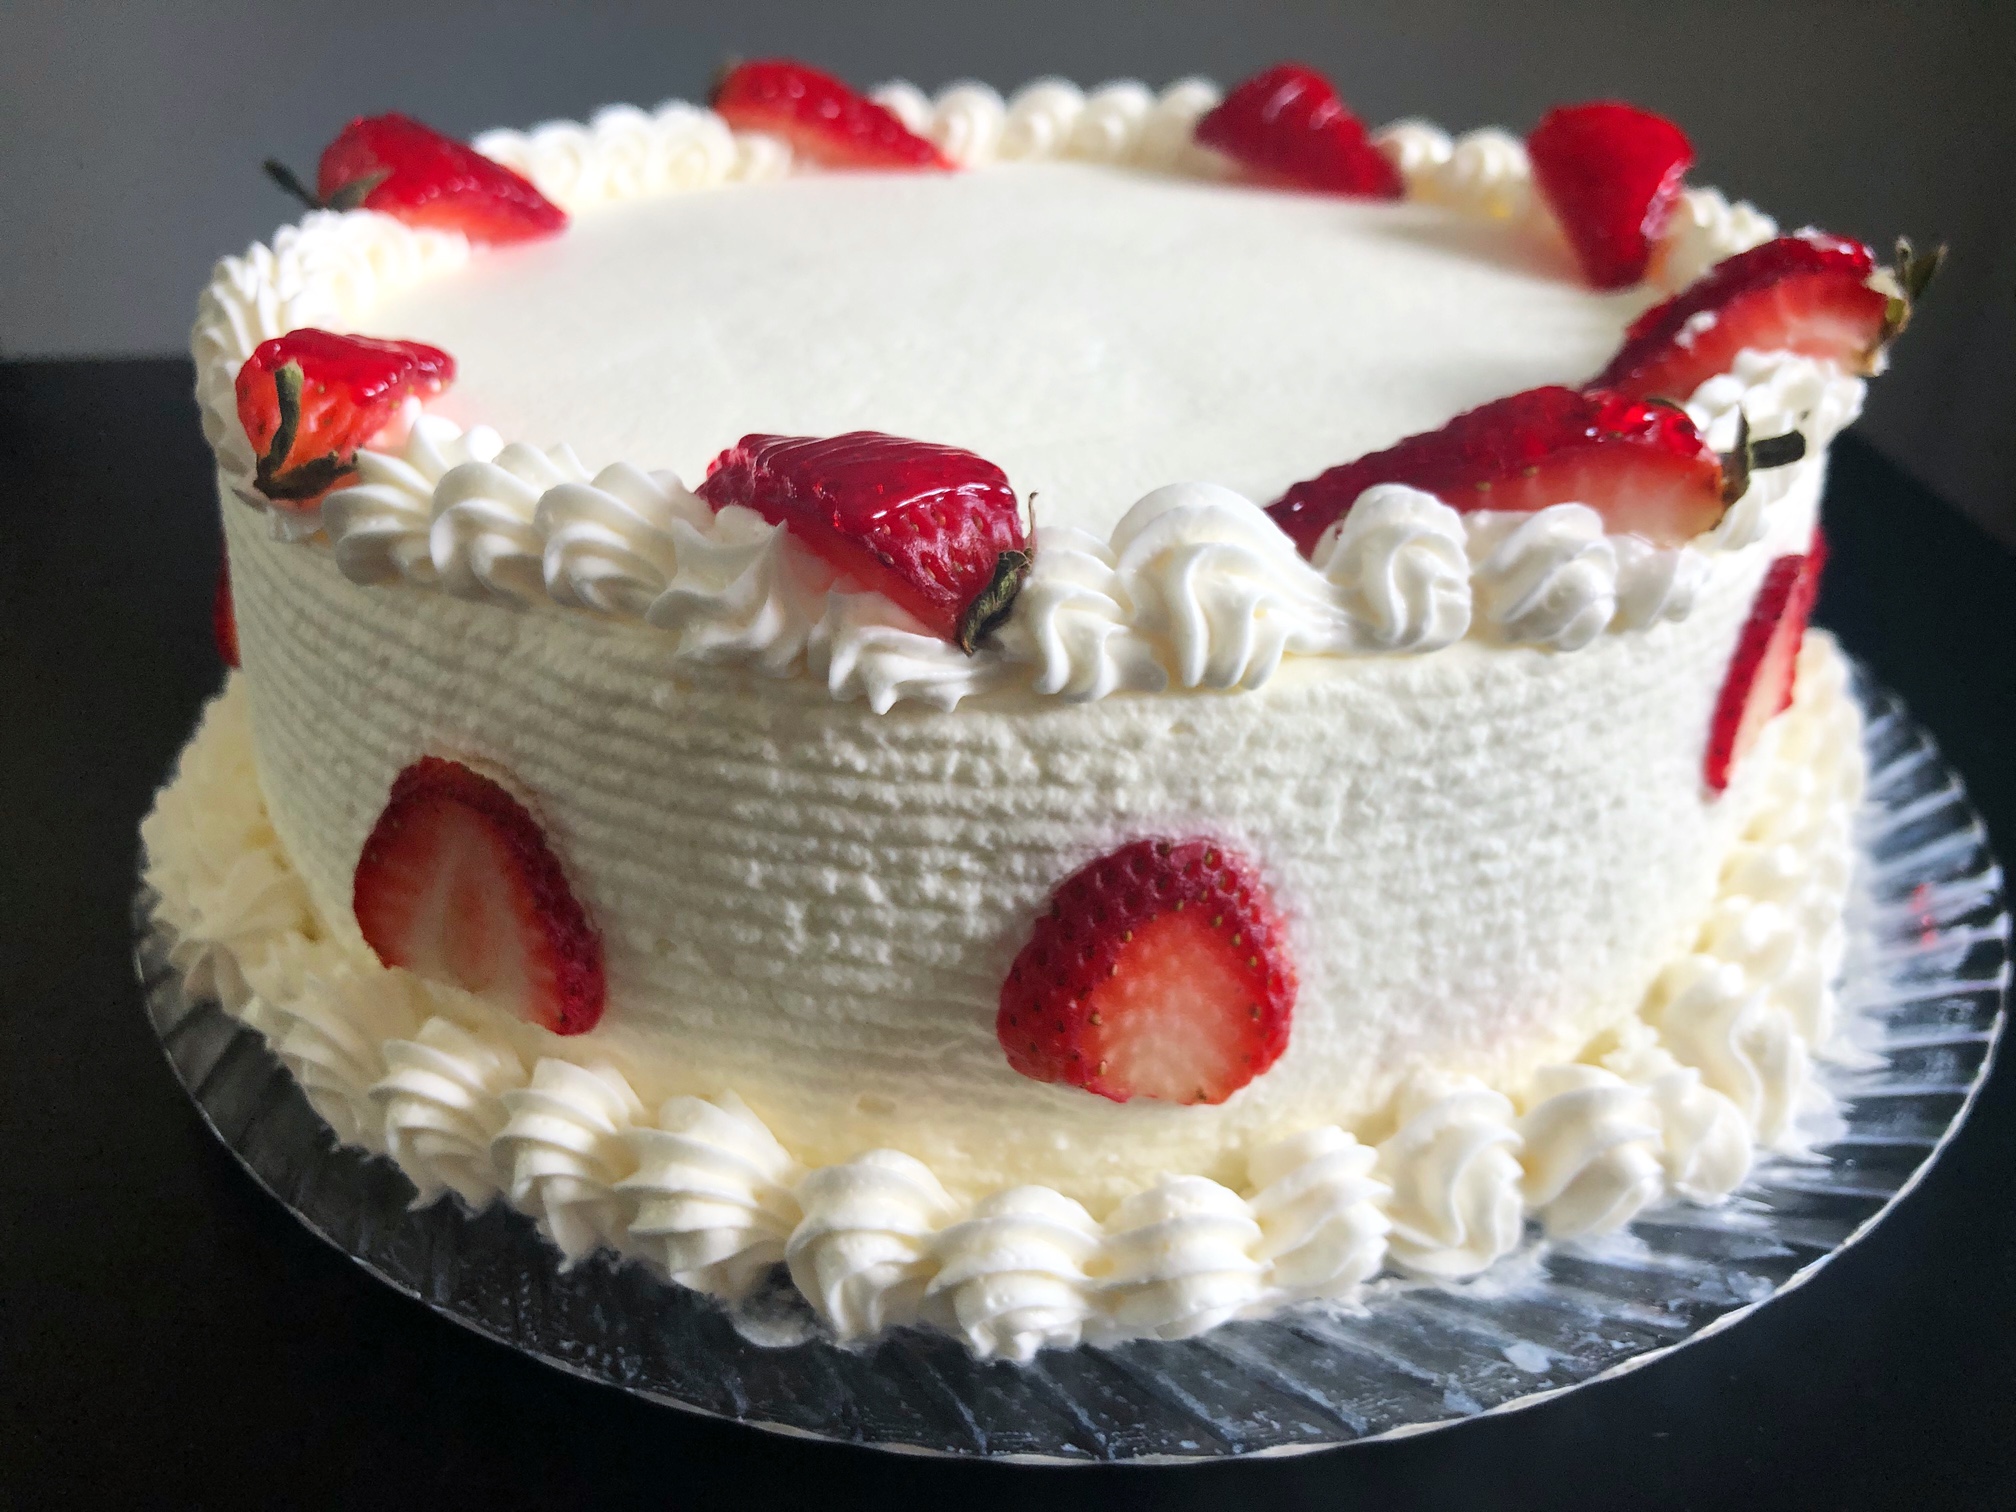 On a black table, there is a large white cake with sliced strawberries as garnish. Photo by Alyssa Buckley.